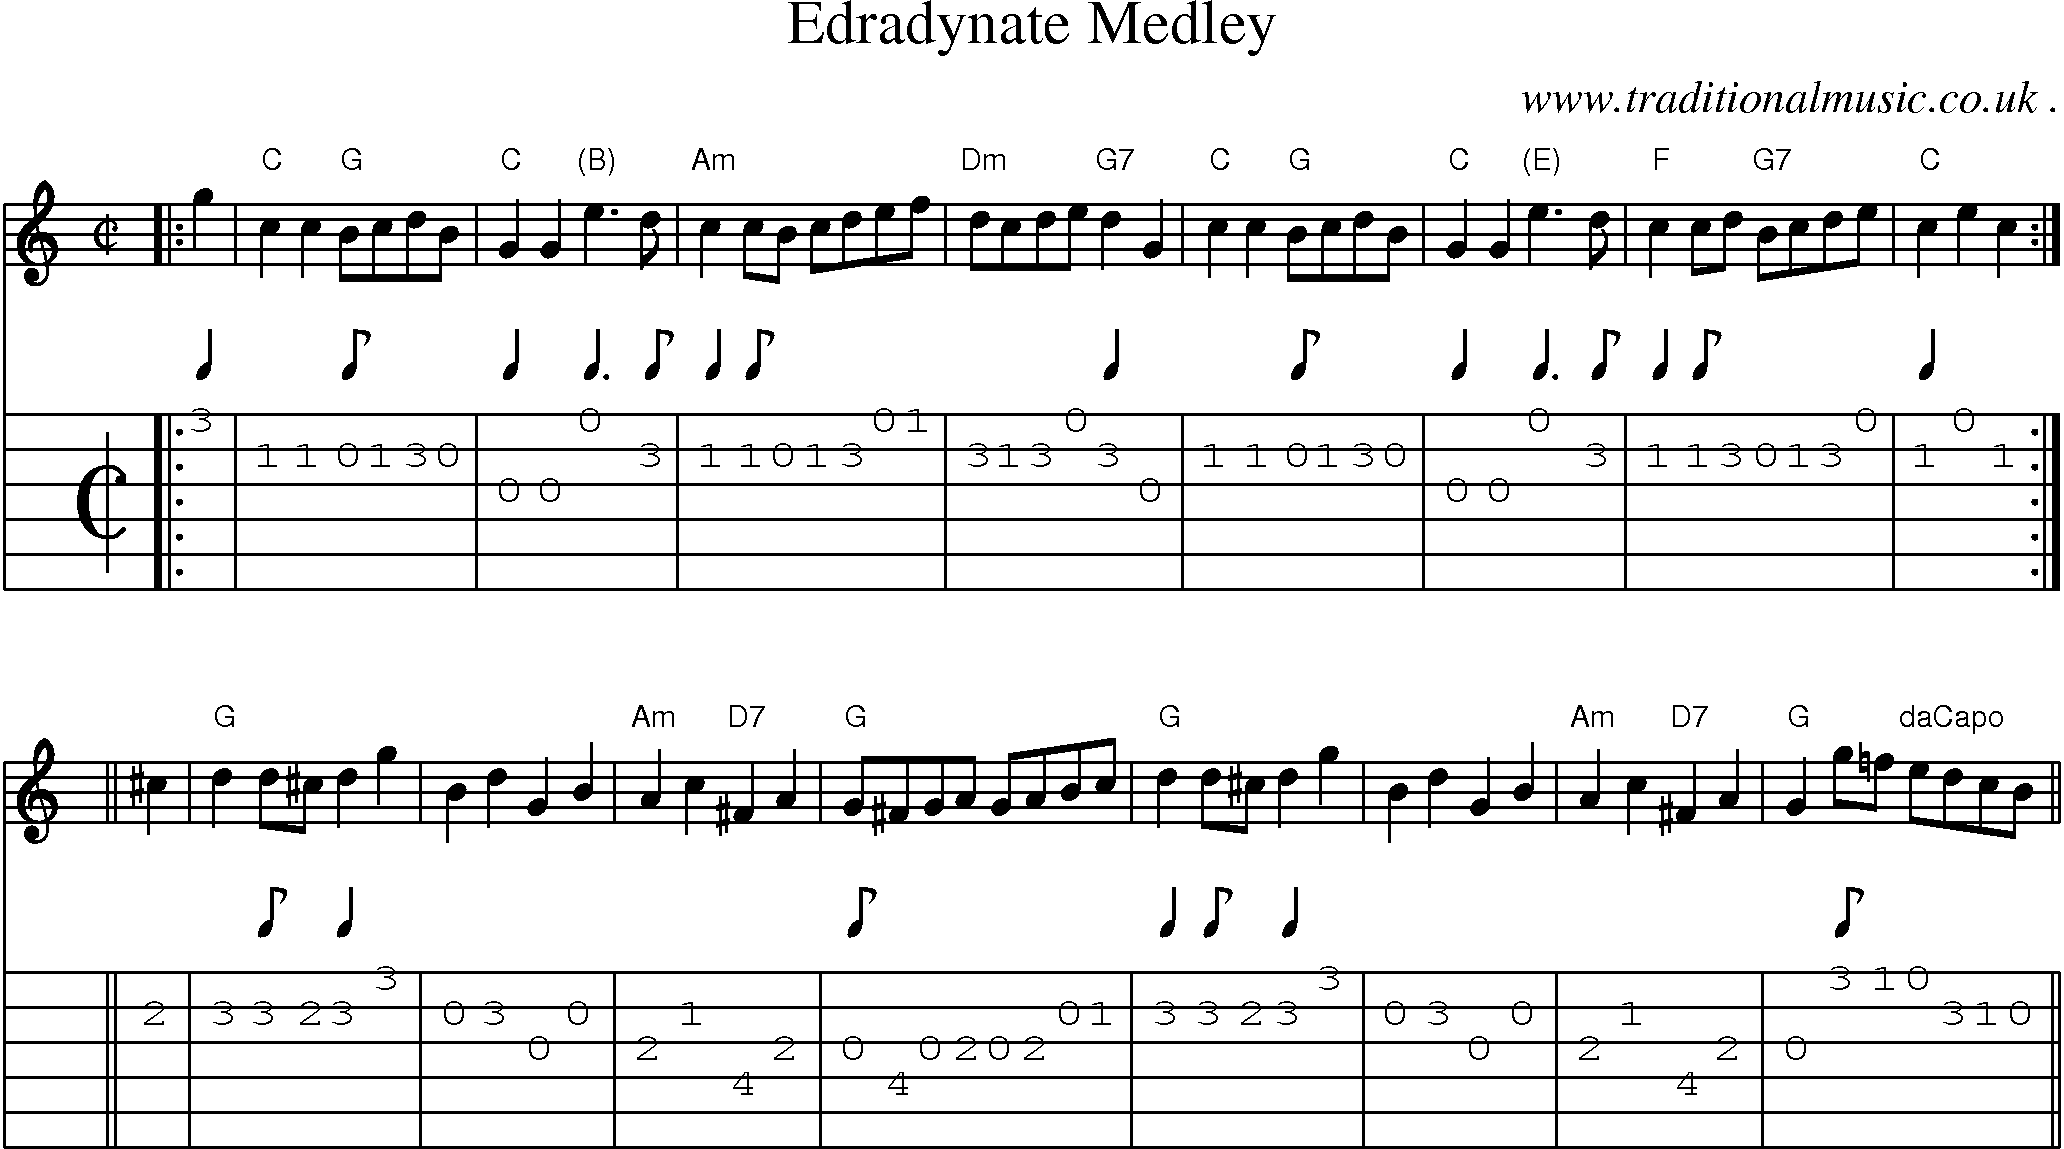 Sheet-music  score, Chords and Guitar Tabs for Edradynate Medley